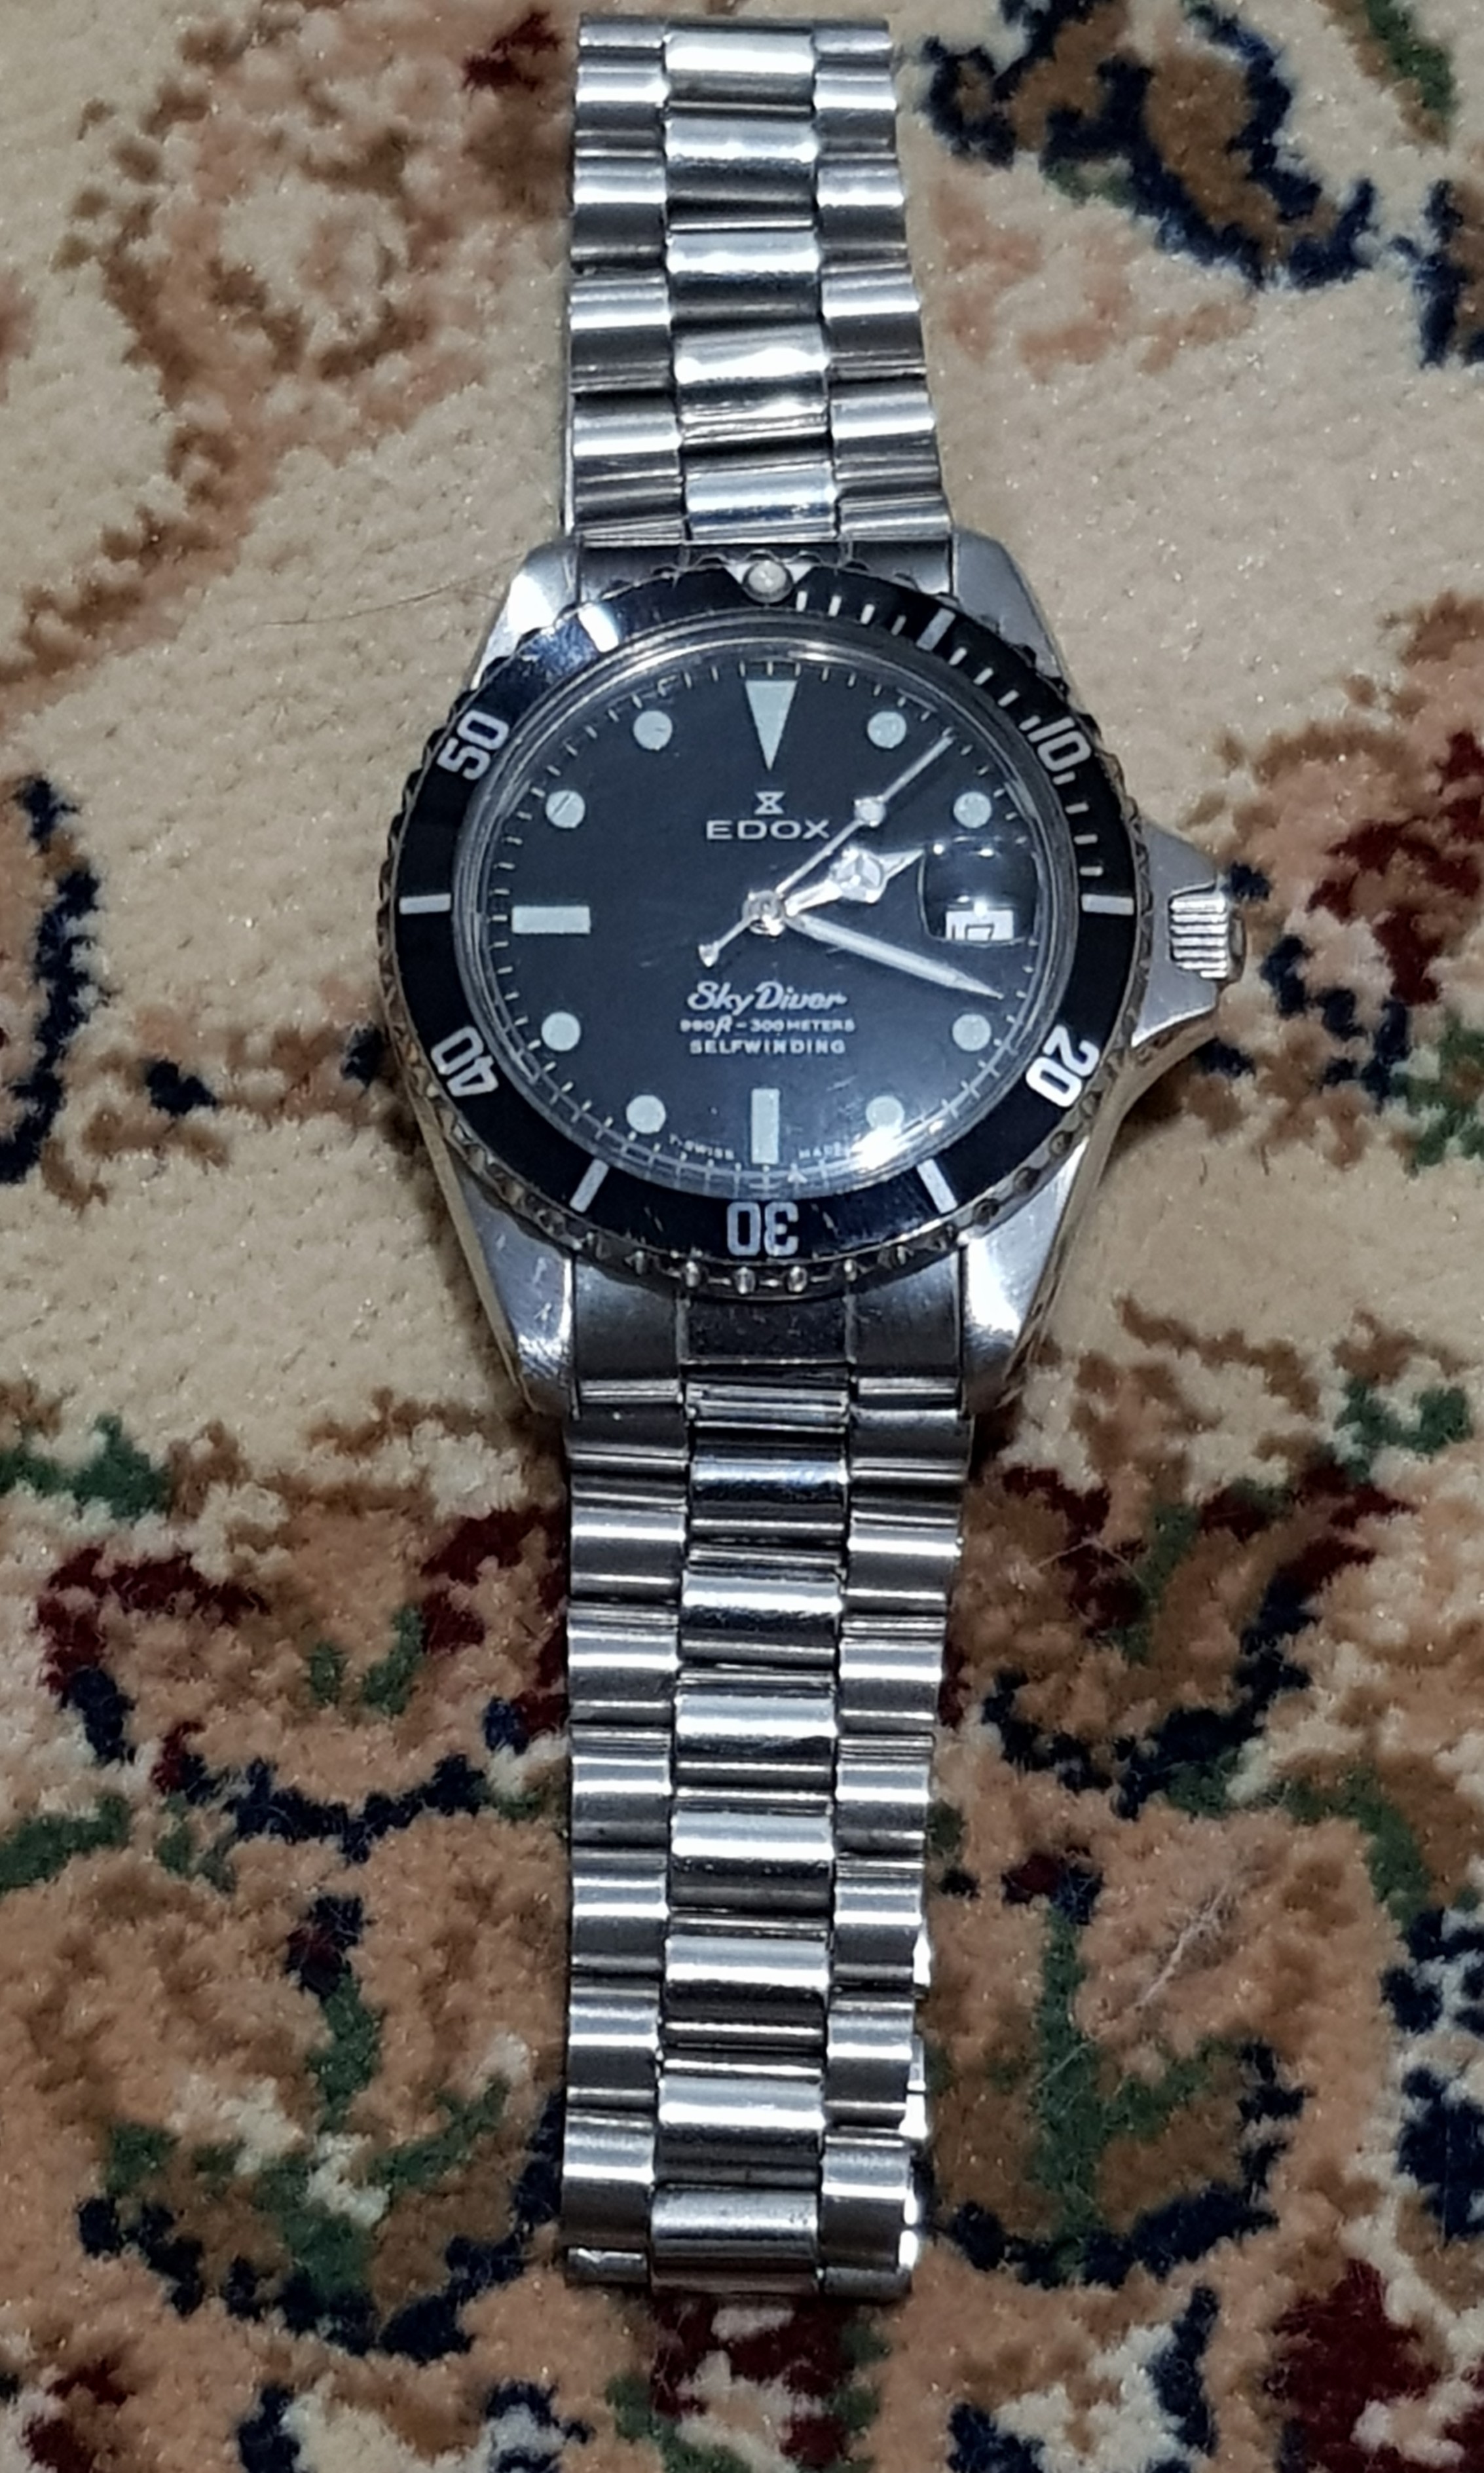 submariner with jubilee